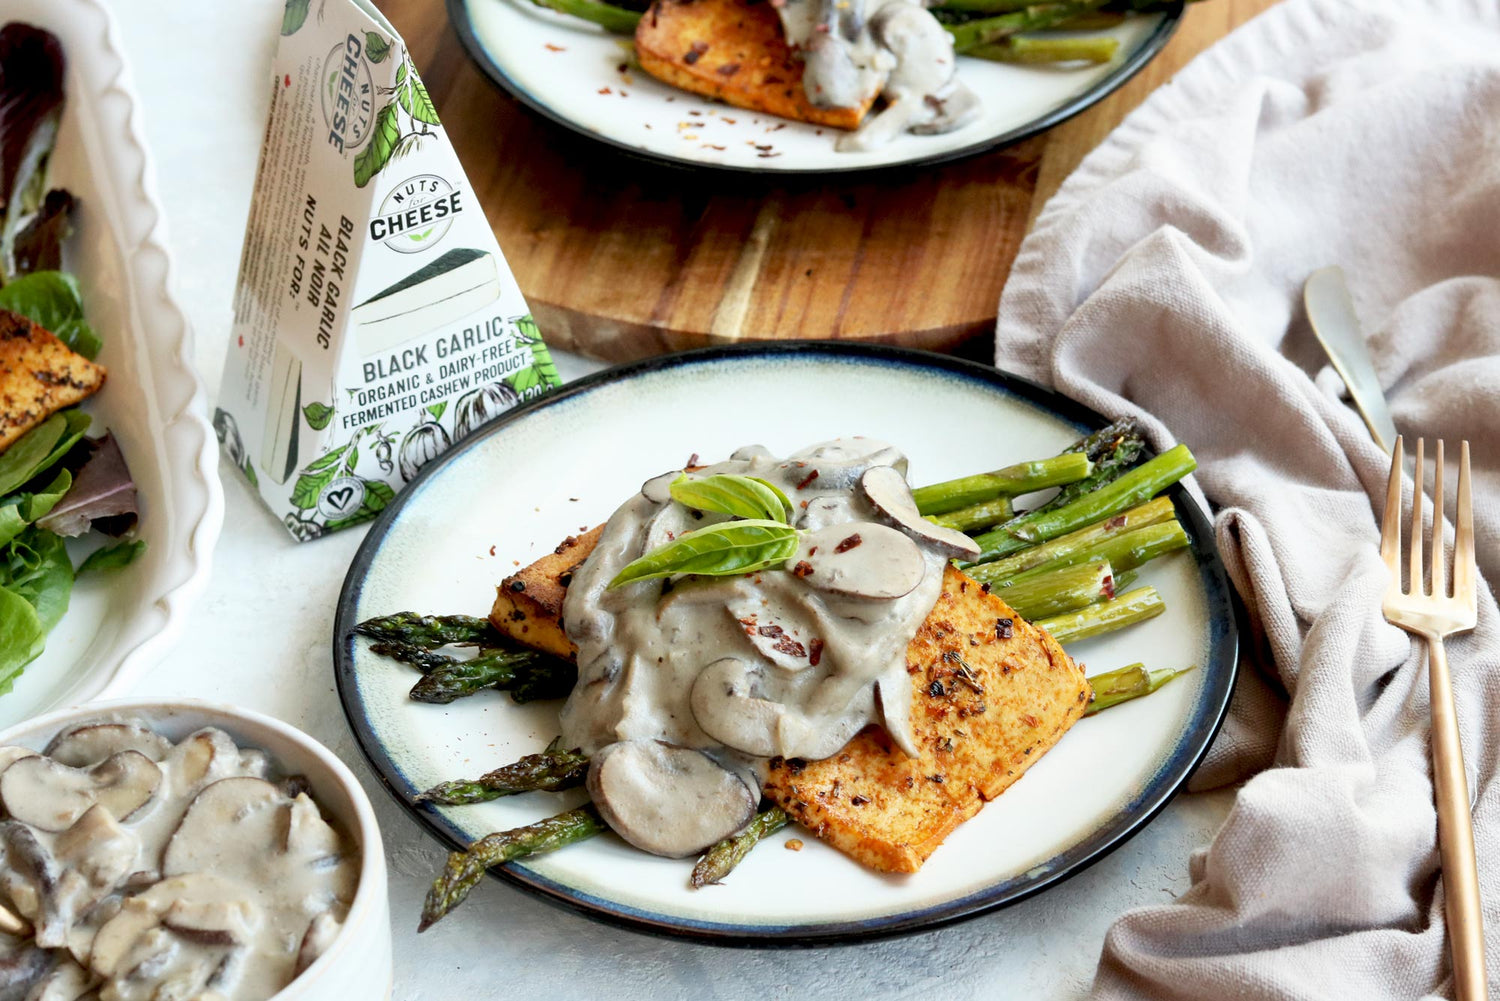 Plate of cooked asparagus topped with a smoked tofu steak and drizzled with a dairy-free black garlic mushroom gravy. Served next to a box of dairy-free black garlic cheese and an extra bowl of vegan mushroom gravy.